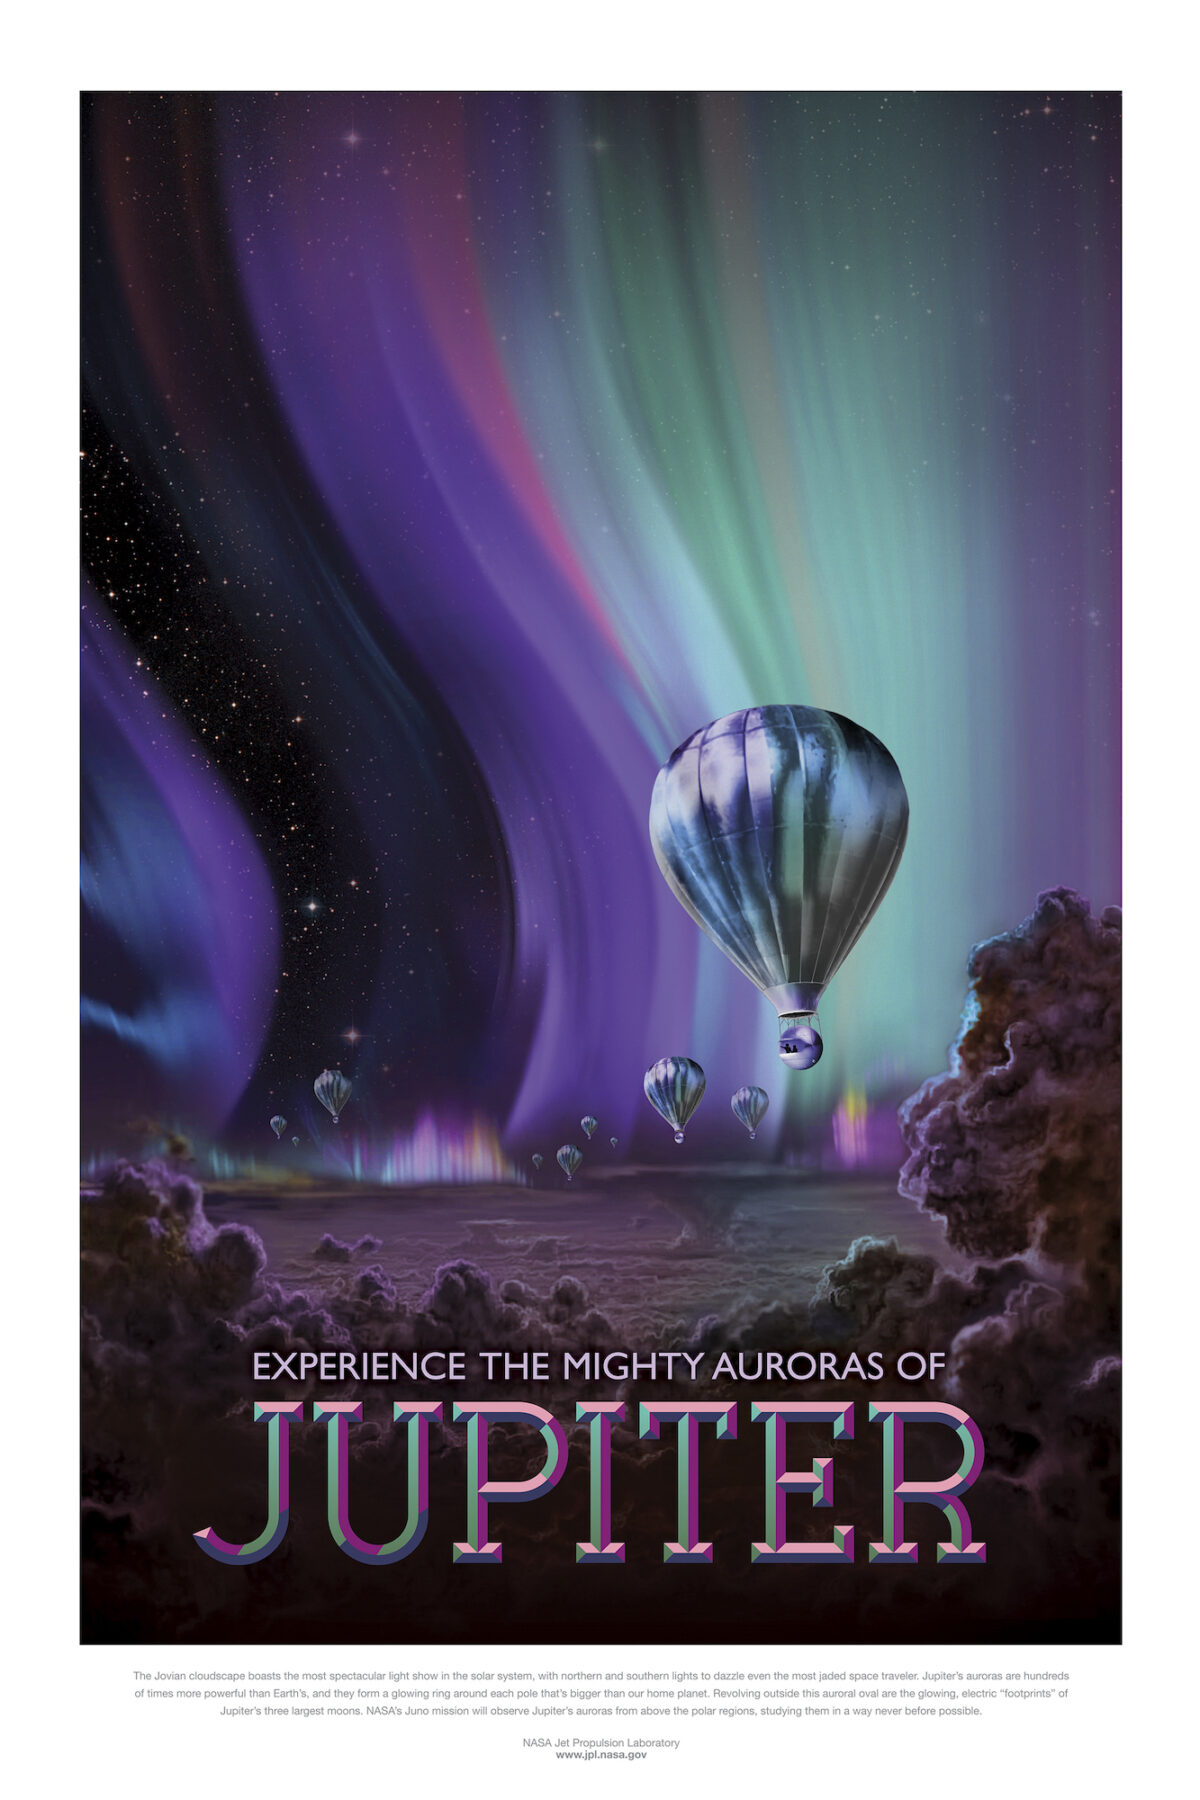 Artist rendering of Jupiter’s auroras from NASA Jet Propulsion Laboratory’s Visions of the Future poster series, 2016, courtesy of NASA/JPL.